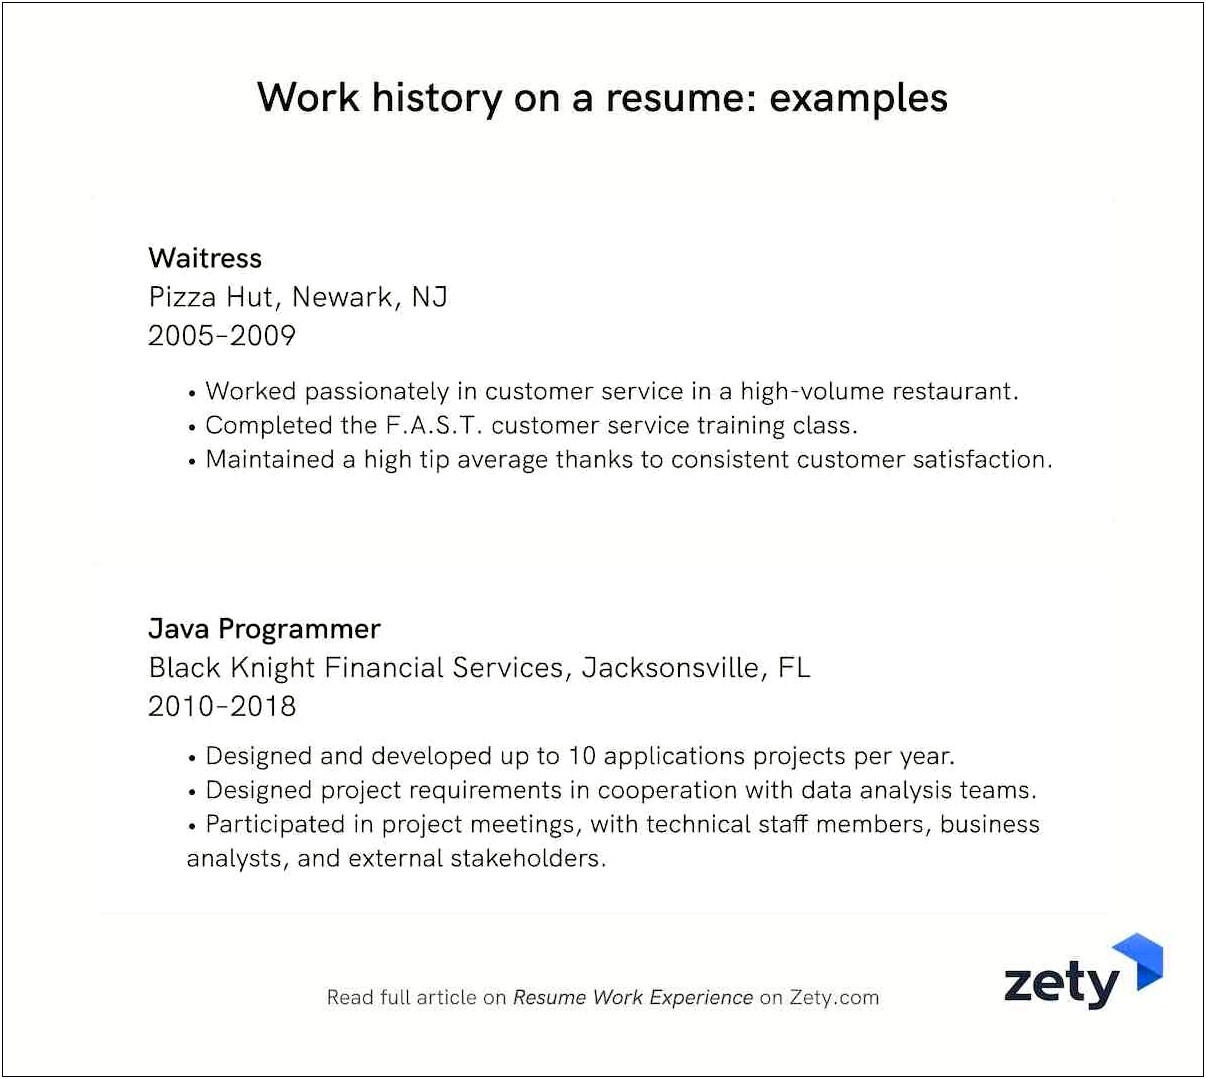 Listing Jobs Over 10 Years Old On Resume